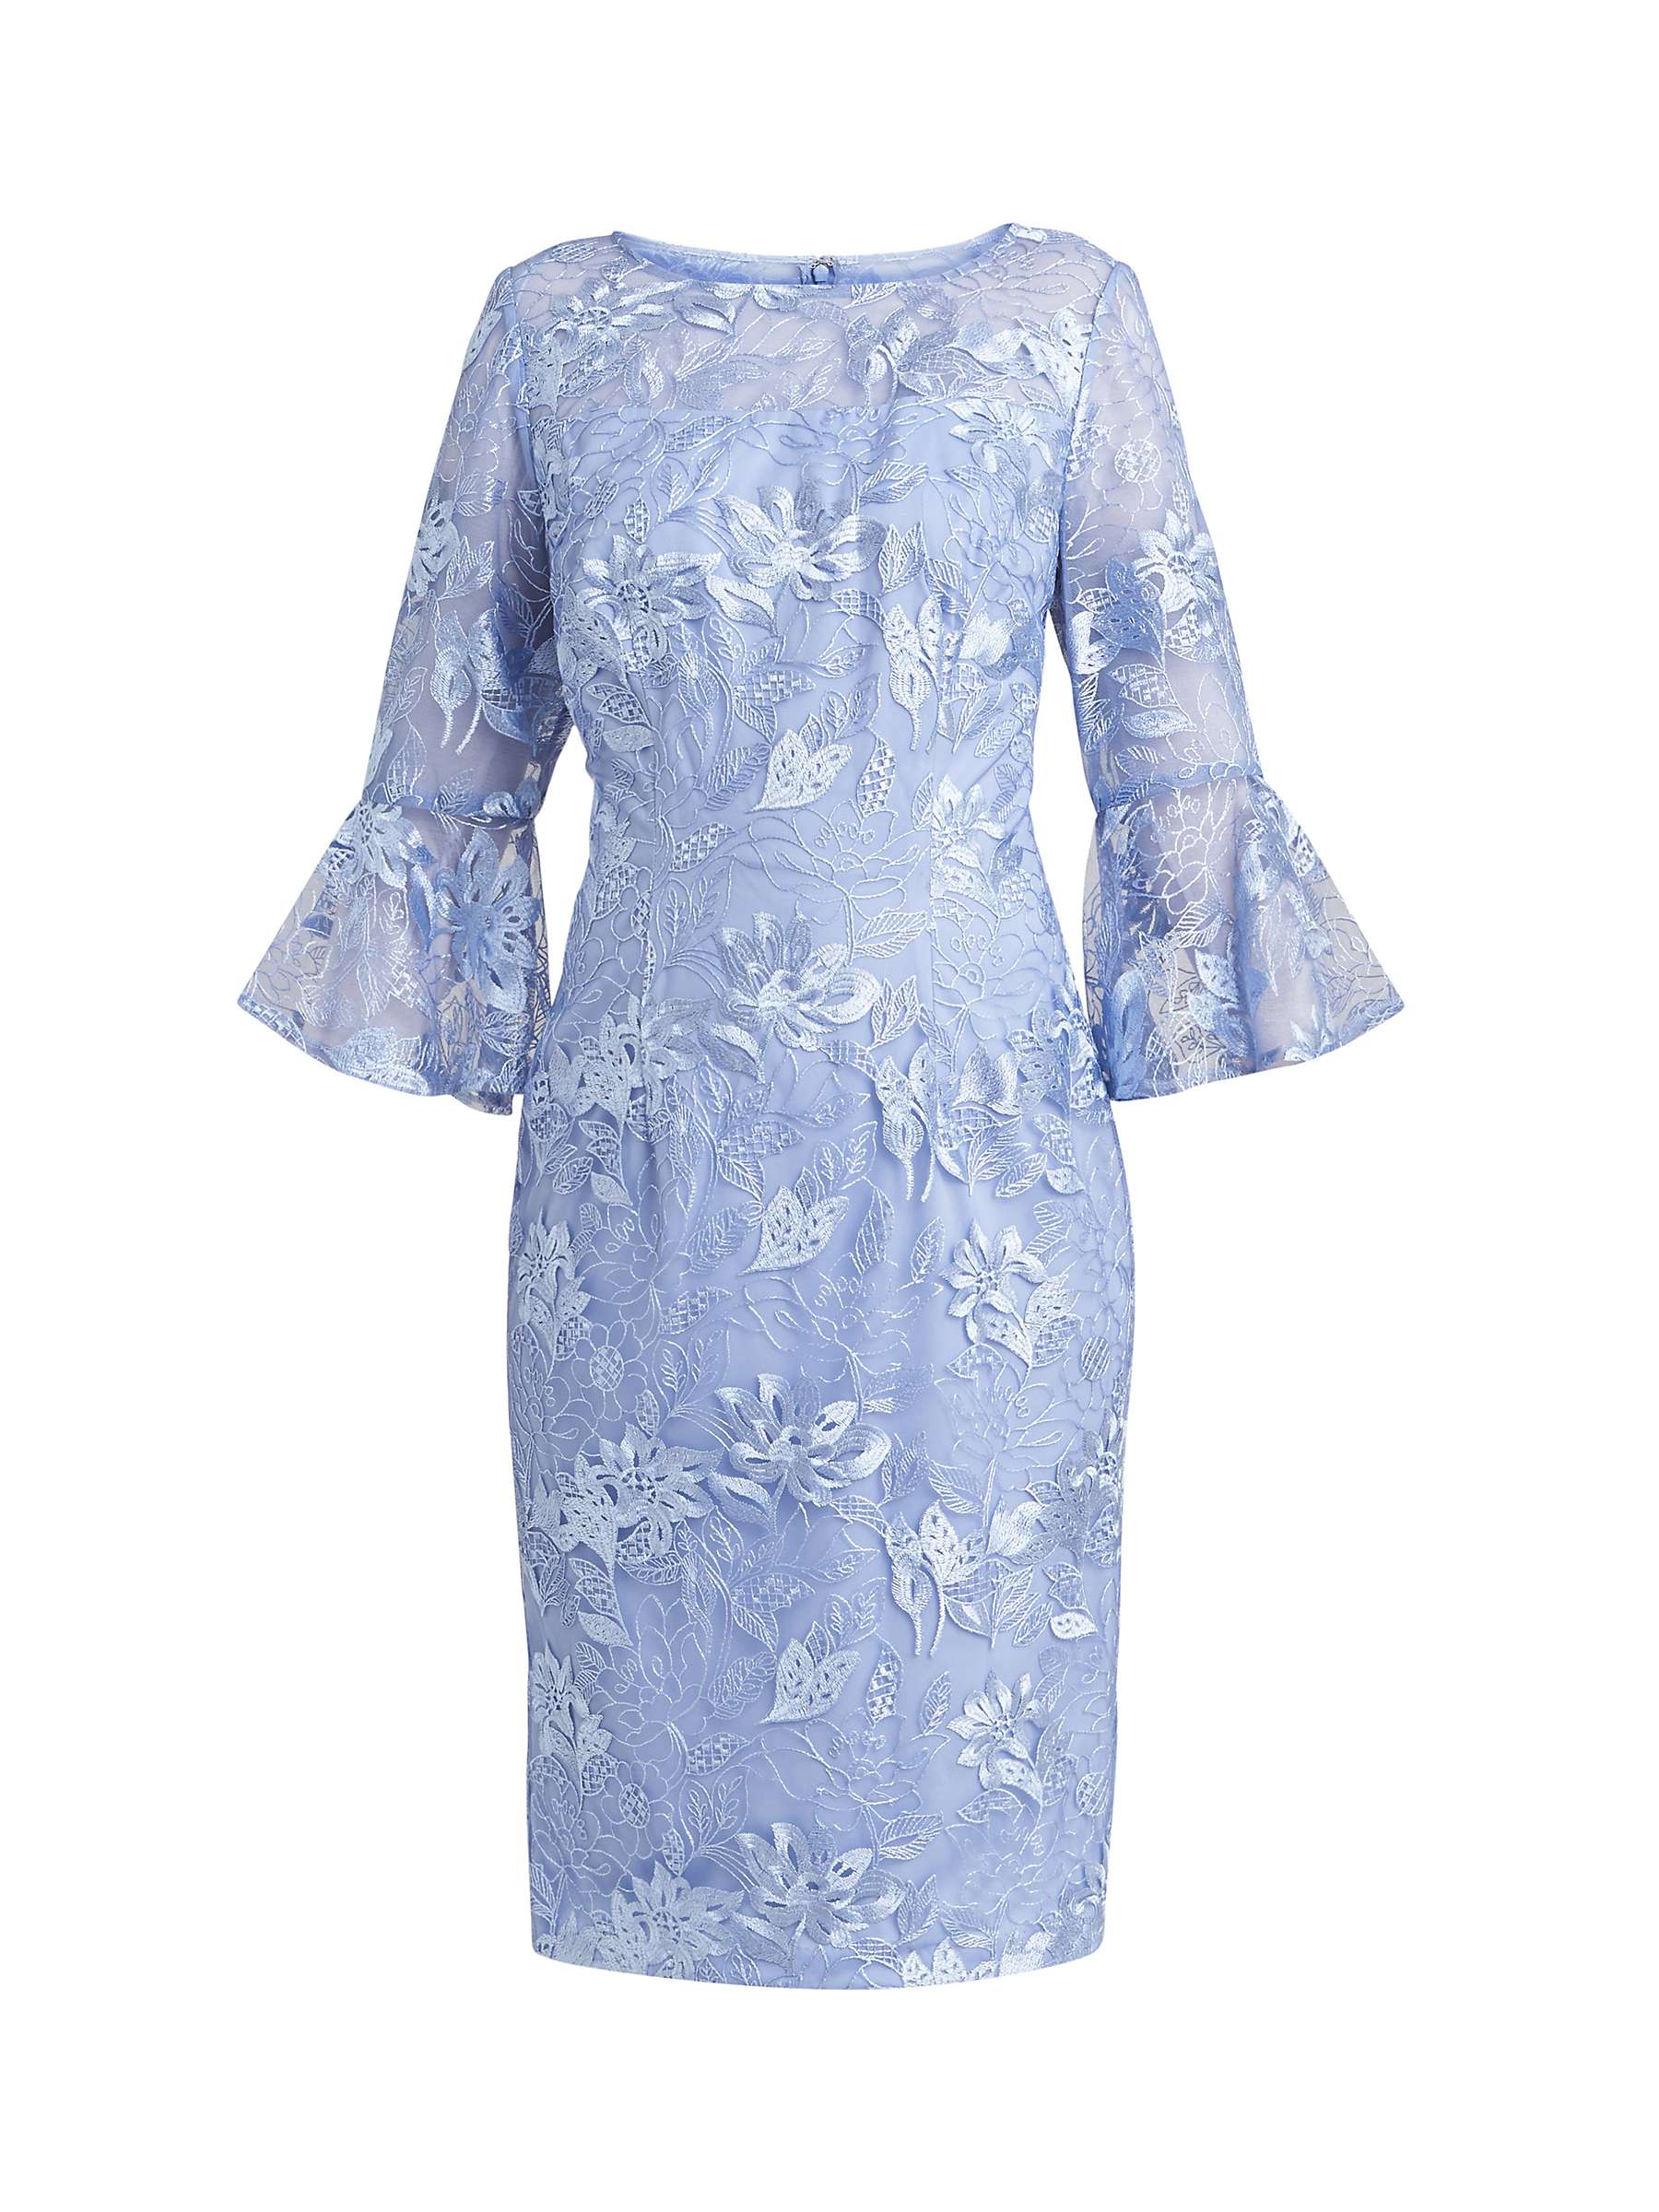 Buy Gina Bacconi Michaela Floral Embroidered Shift Dress, Hydrangea Online at johnlewis.com